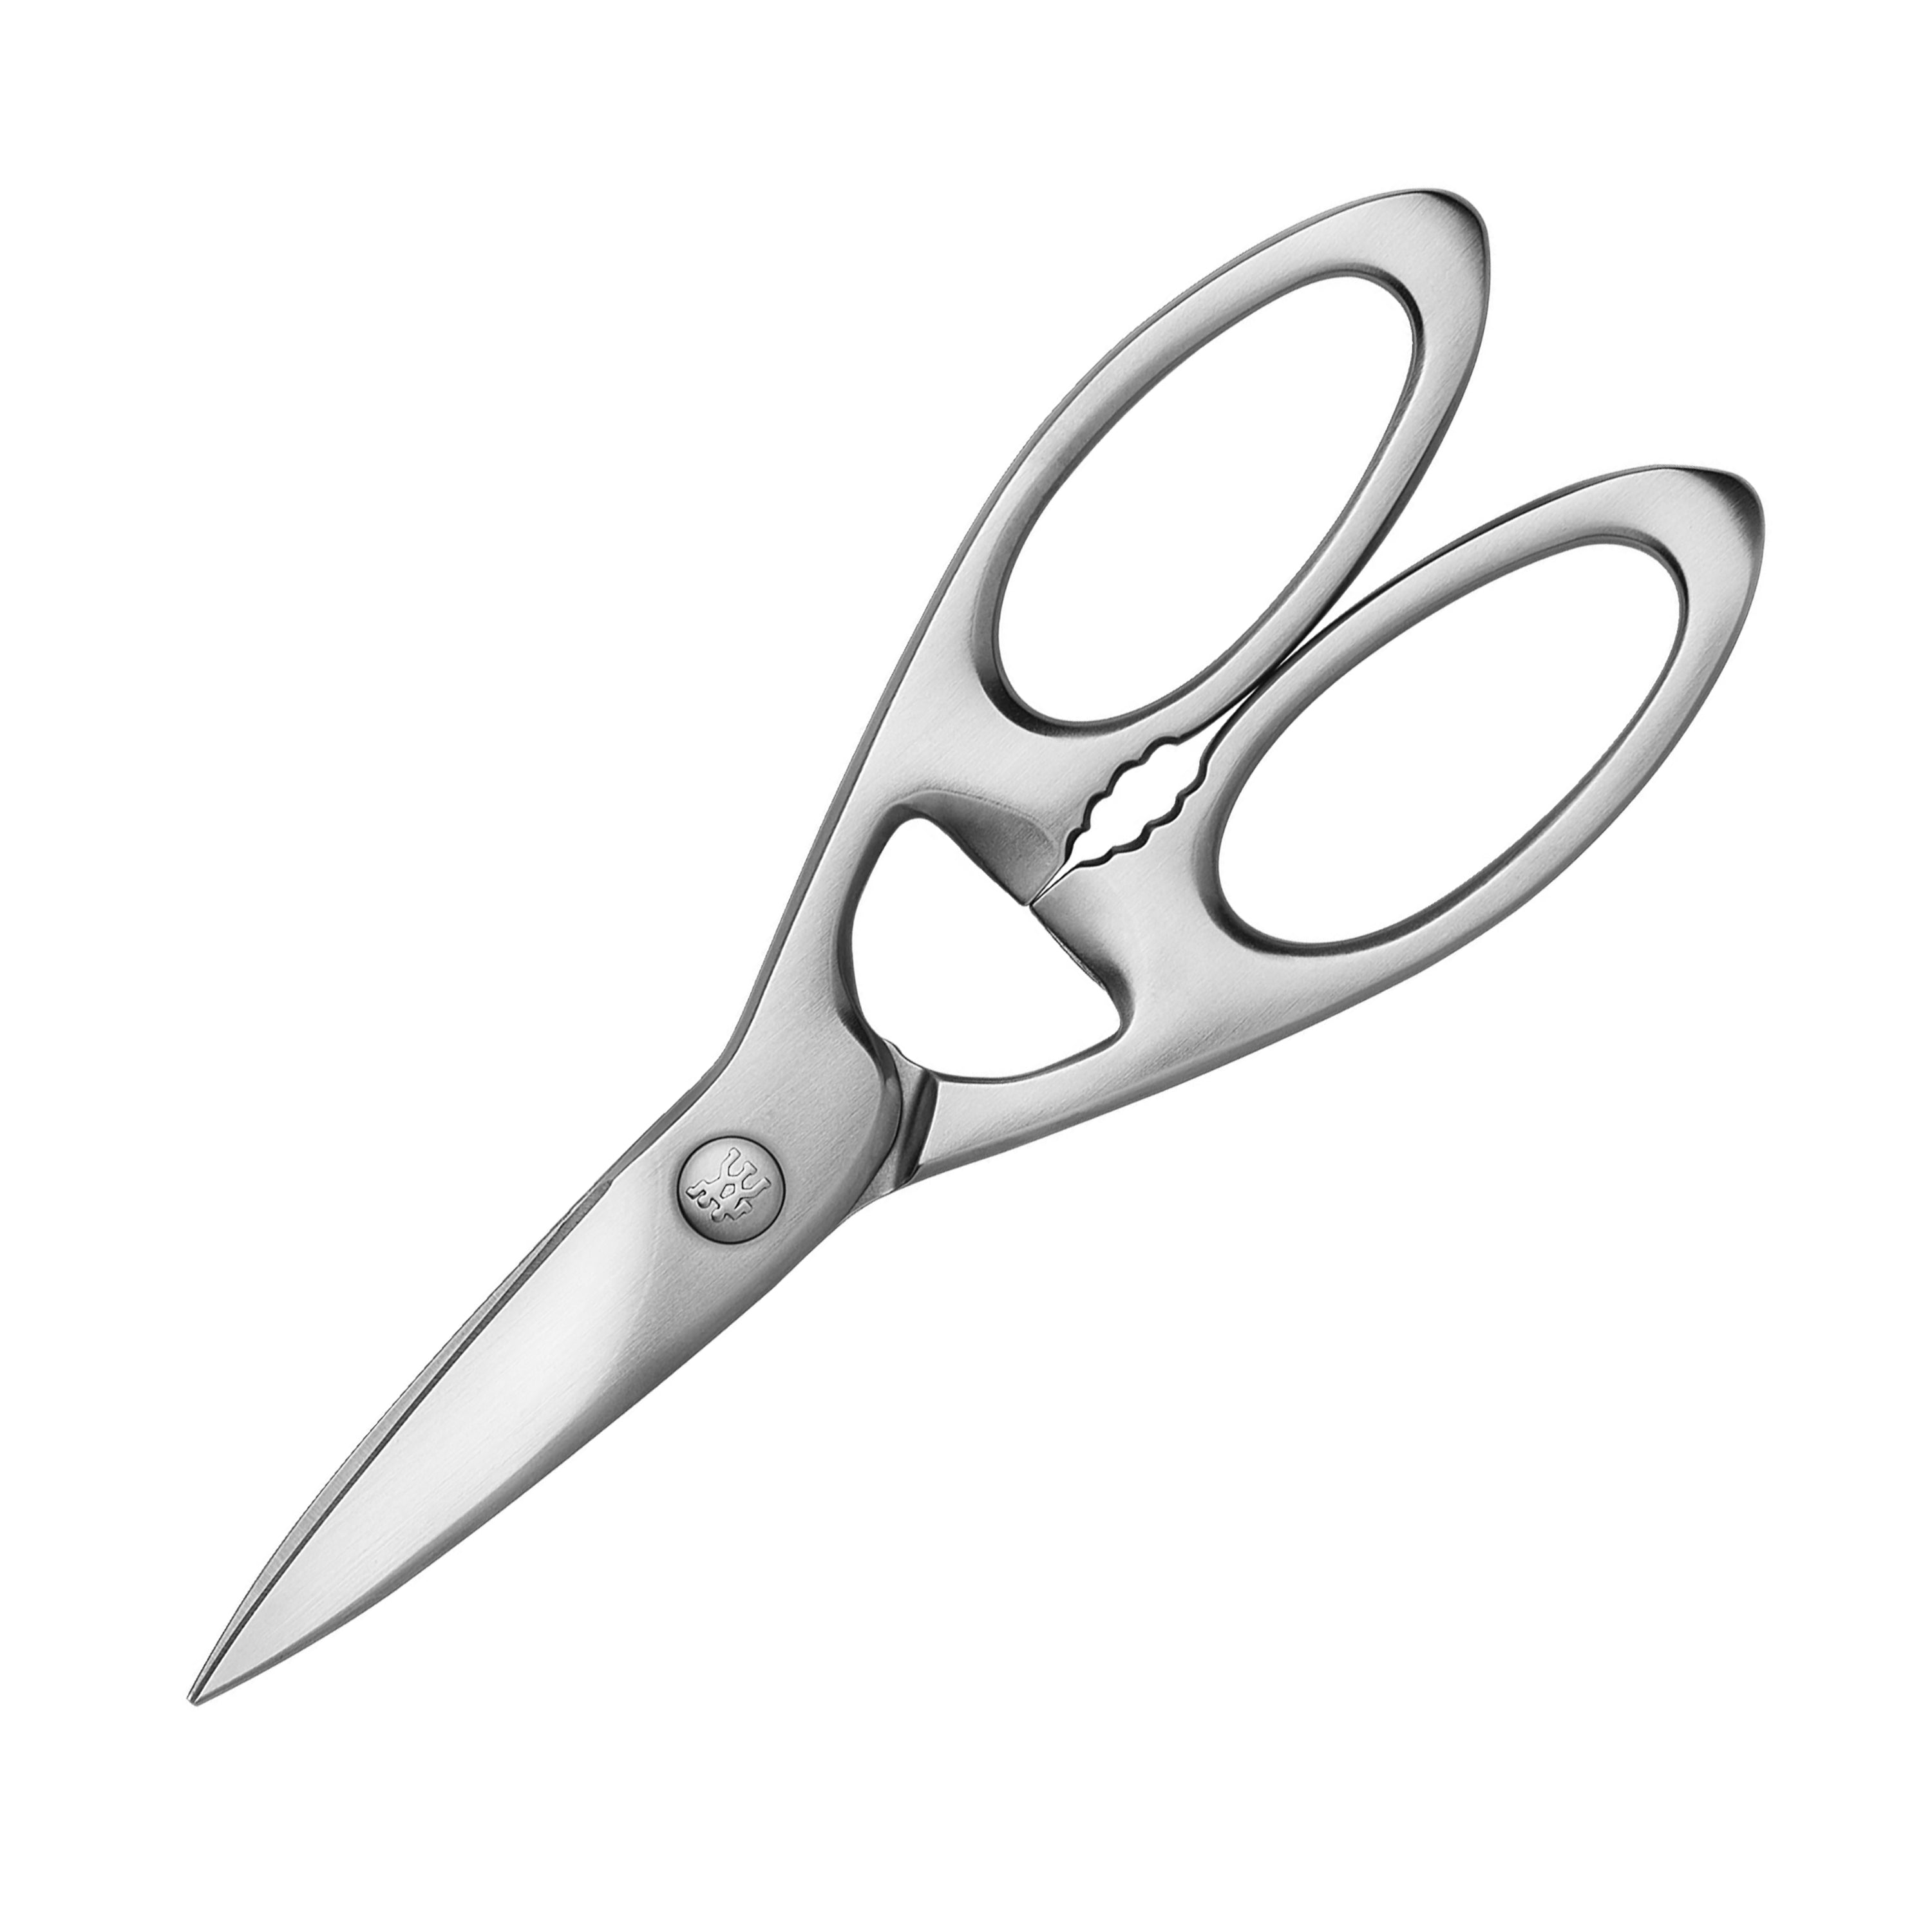  HENCKELS Kitchen Shears for Poultry, Dishwasher Safe, Heavy  Duty, Stainless Steel 4-Inch: Home & Kitchen